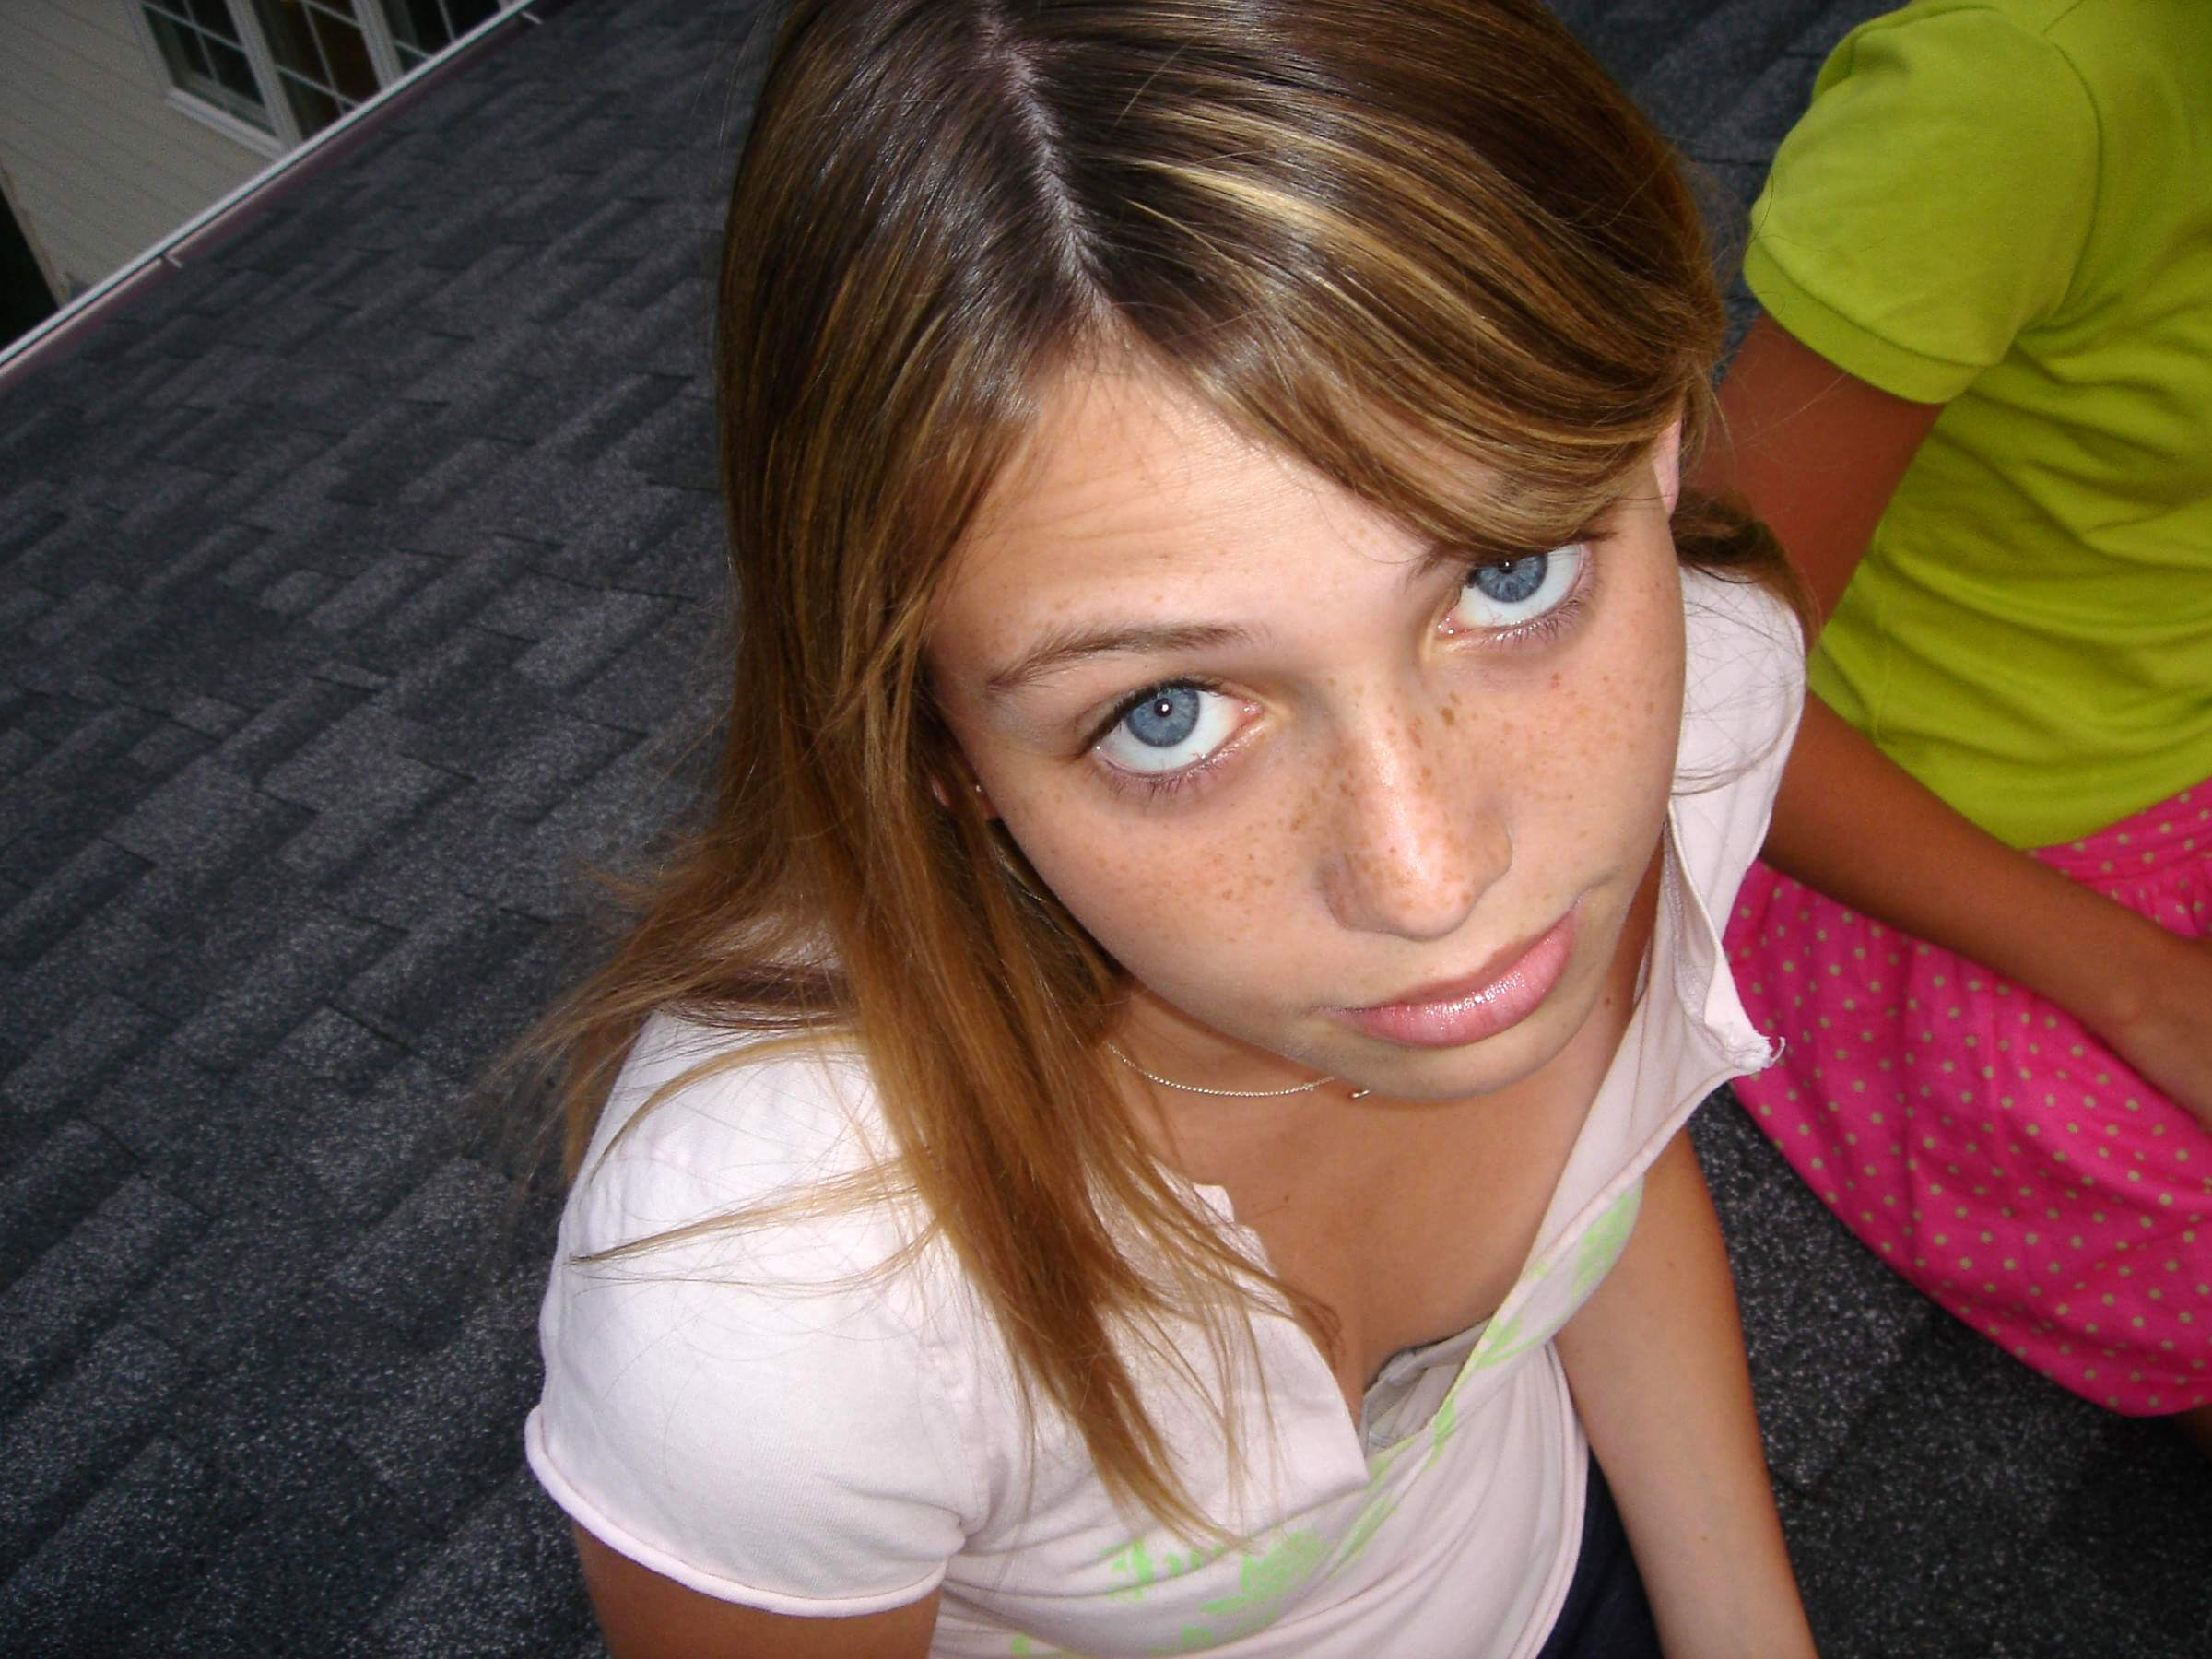 Absolutely Too Cute Jailbate Teen Girl Big Blue Eyes Cute Freckles And Downblouse